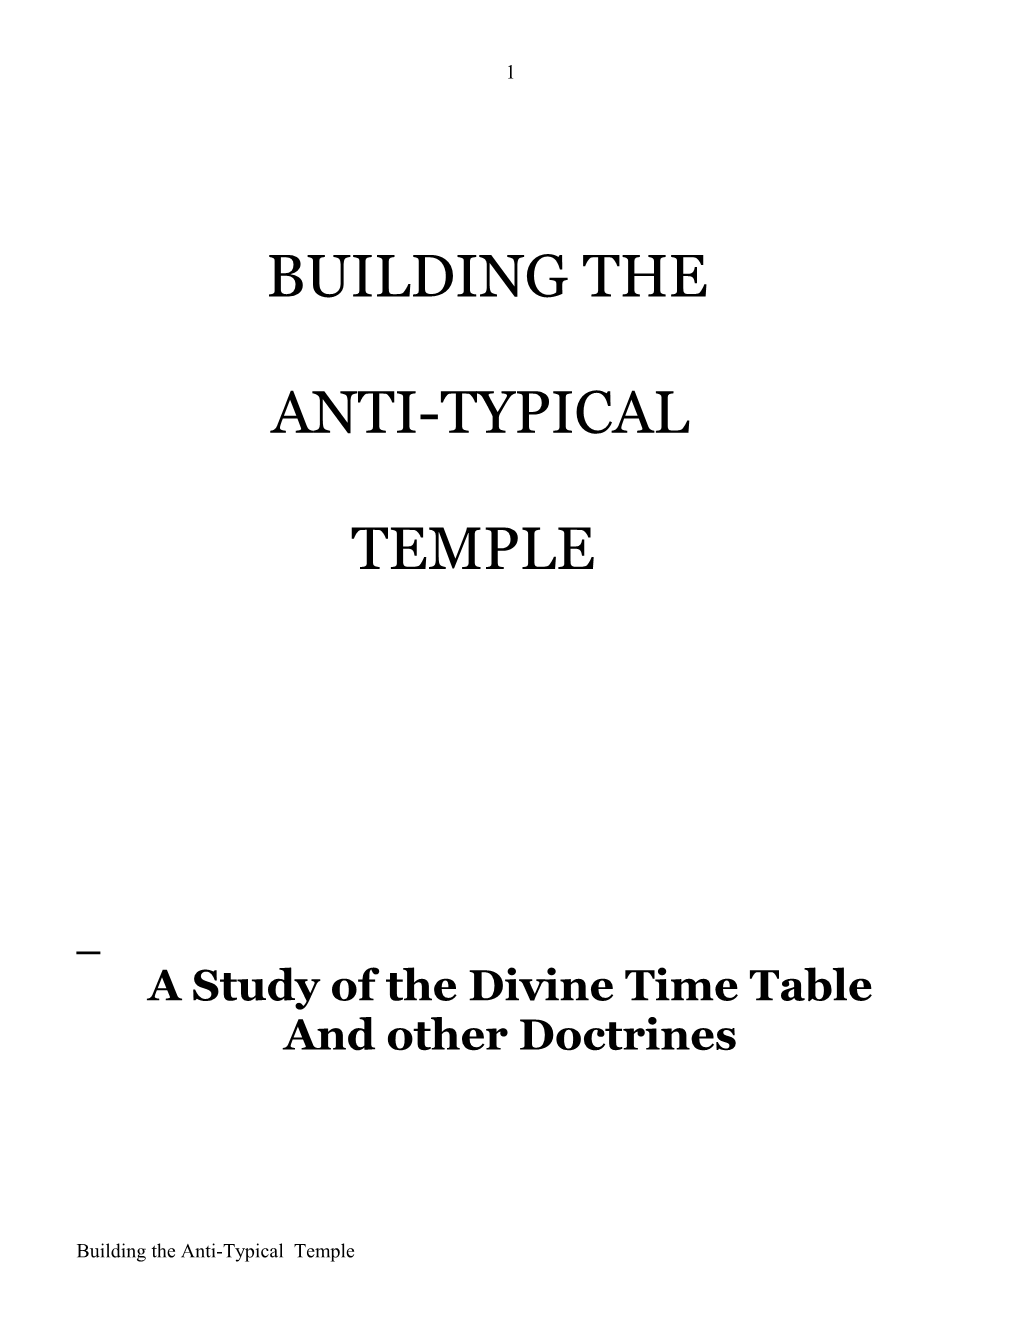 Building the Anti-Typical Temple